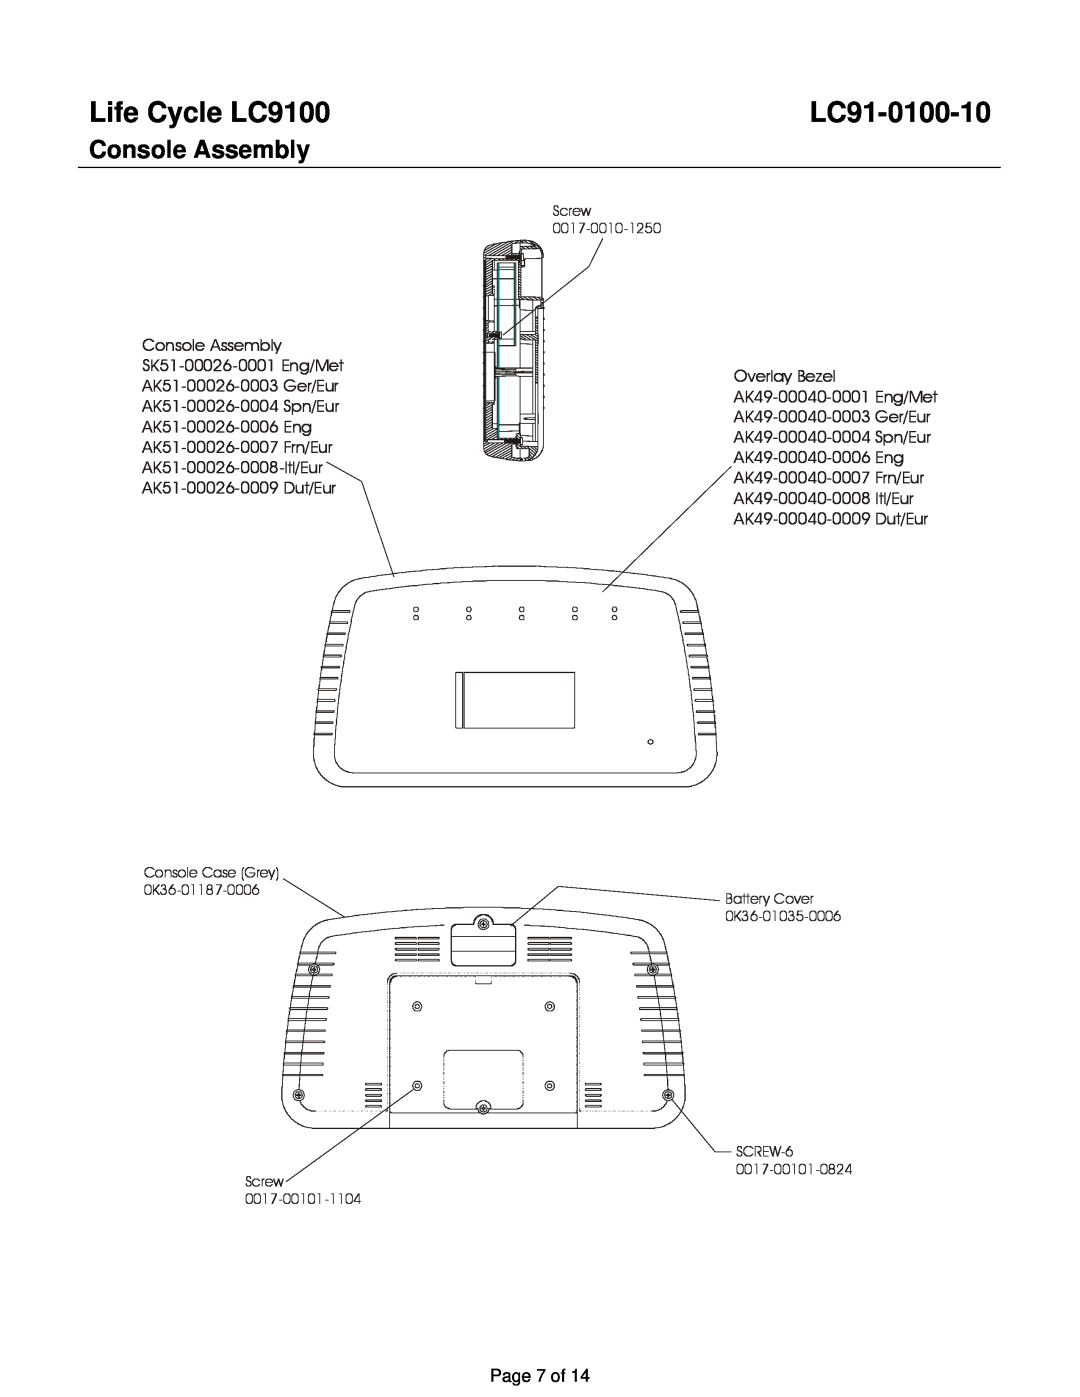 Life Fitness manual Console Assembly, Life Cycle LC9100, LC91-0100-10, Page 7 of 